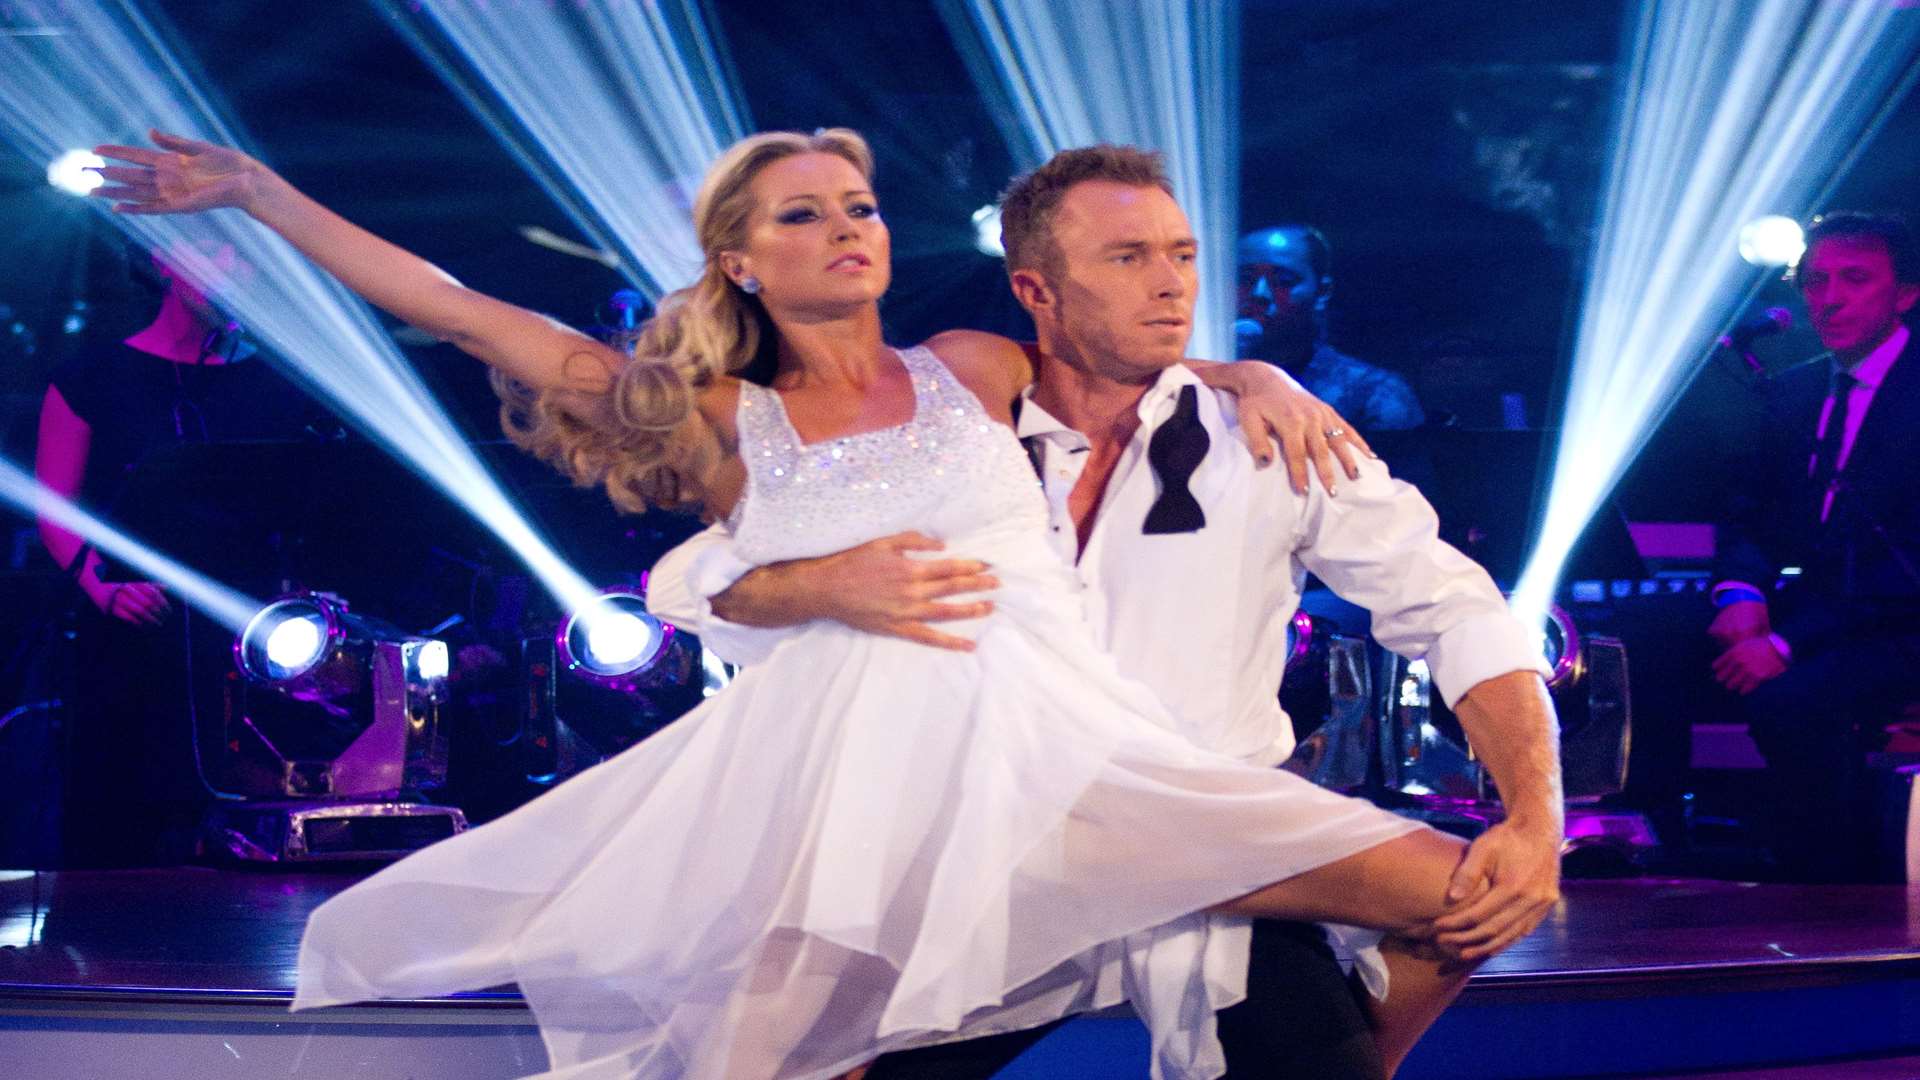 James Jordan left Strictly in 2013. Pictured with Denise Van Outen (Credit: BBC/Guy Levy)